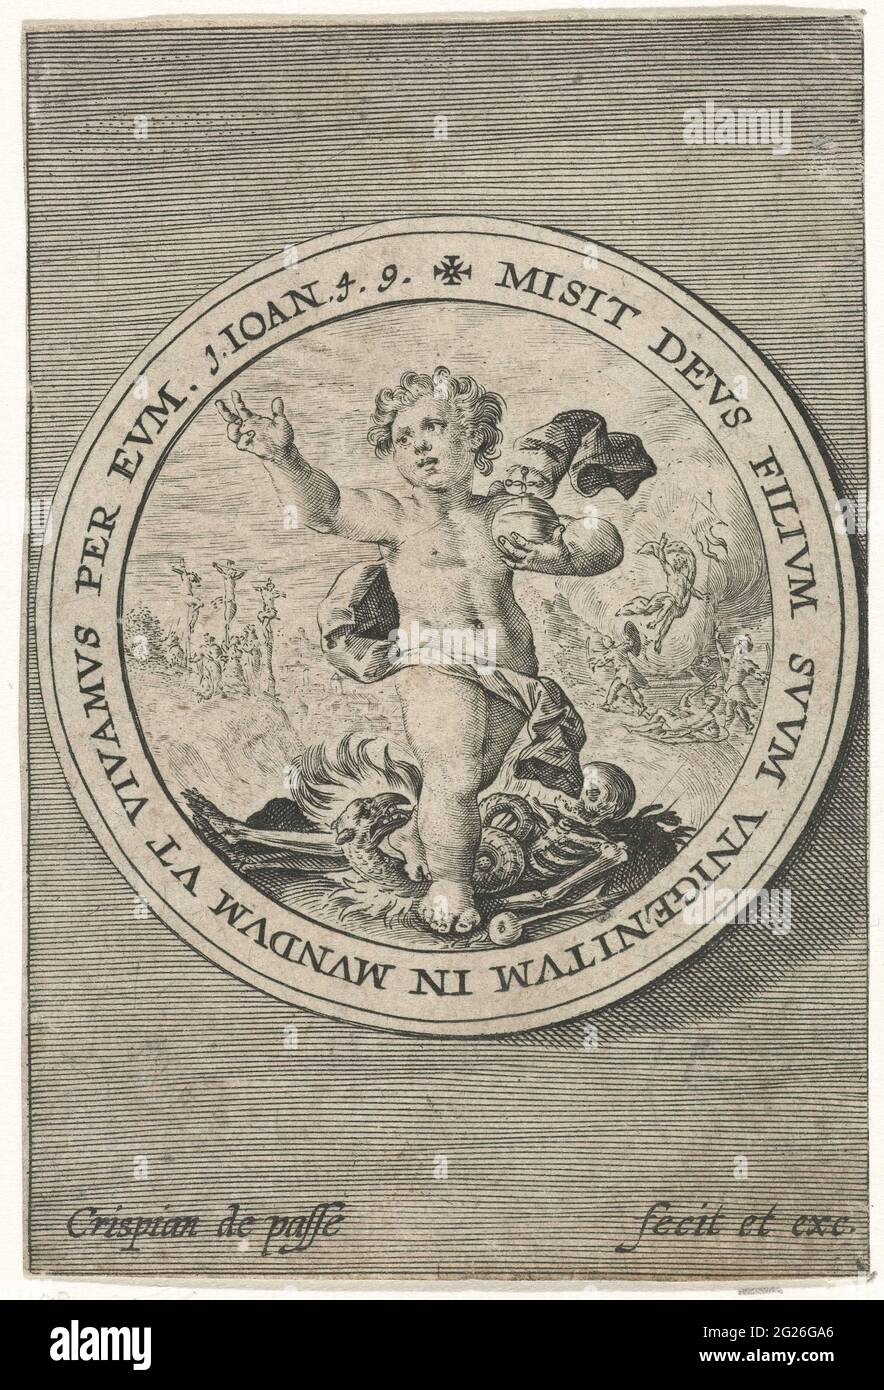 Putto as a salvator mundi; Putti that depict God's Word; Verbum dei. Medallion with putto as a Salvator Mundi who travels a devil and death. In the background the crucifixion and resurrection of Christ. The print has a frame with a bible quote from Joh. 4: 9 in Latin. Stock Photo